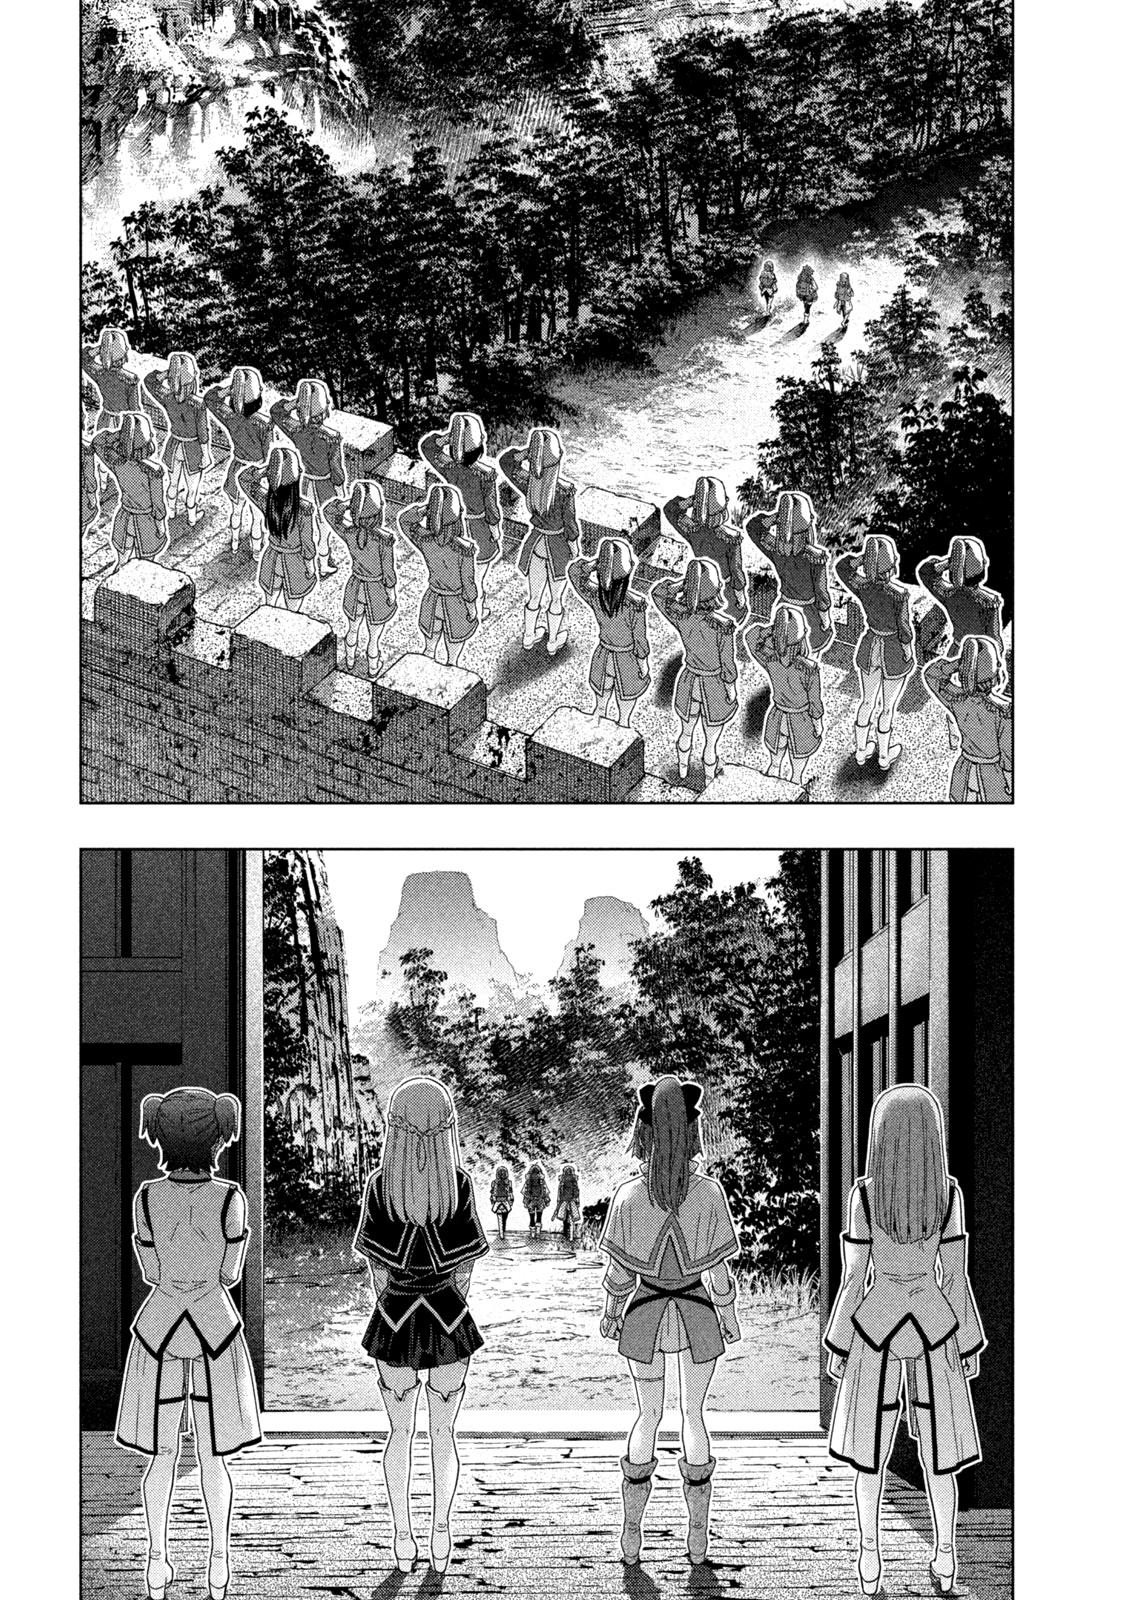 Parallel Paradise Chapter 163: At First Glance, An Isolated . . . House? page 13 - Mangakakalot